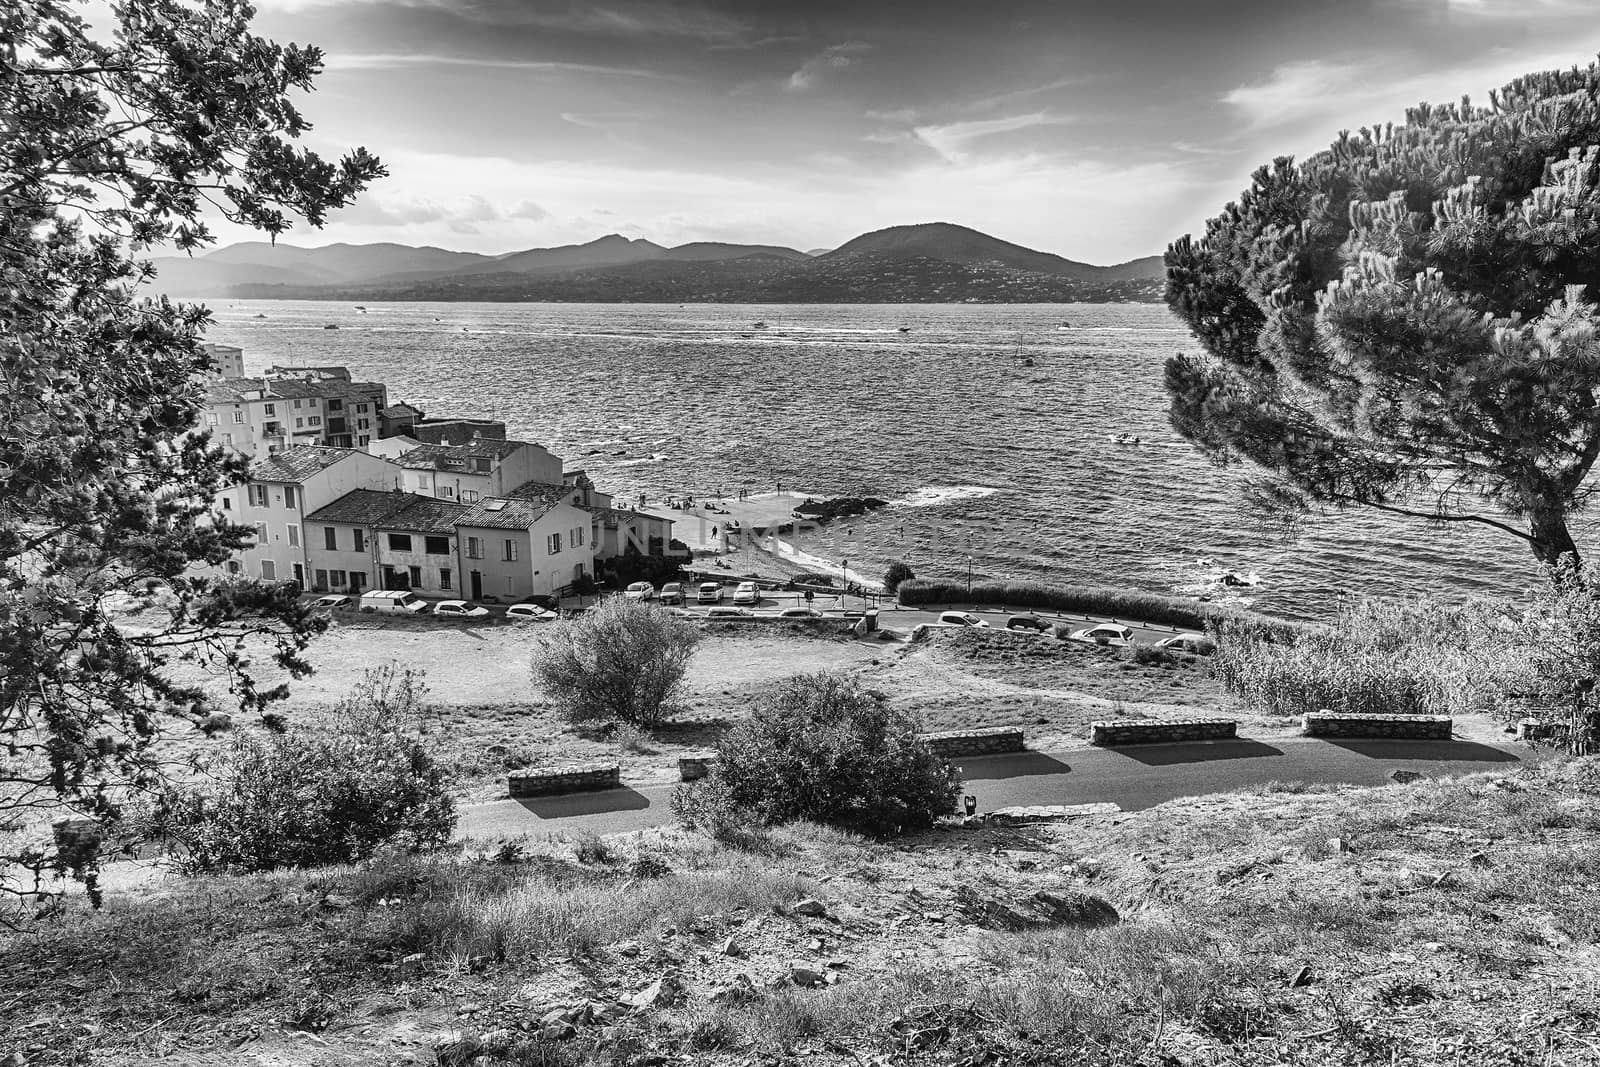 Scenic view of Saint-Tropez from Castle Hill, Cote d'Azur, Franc by marcorubino